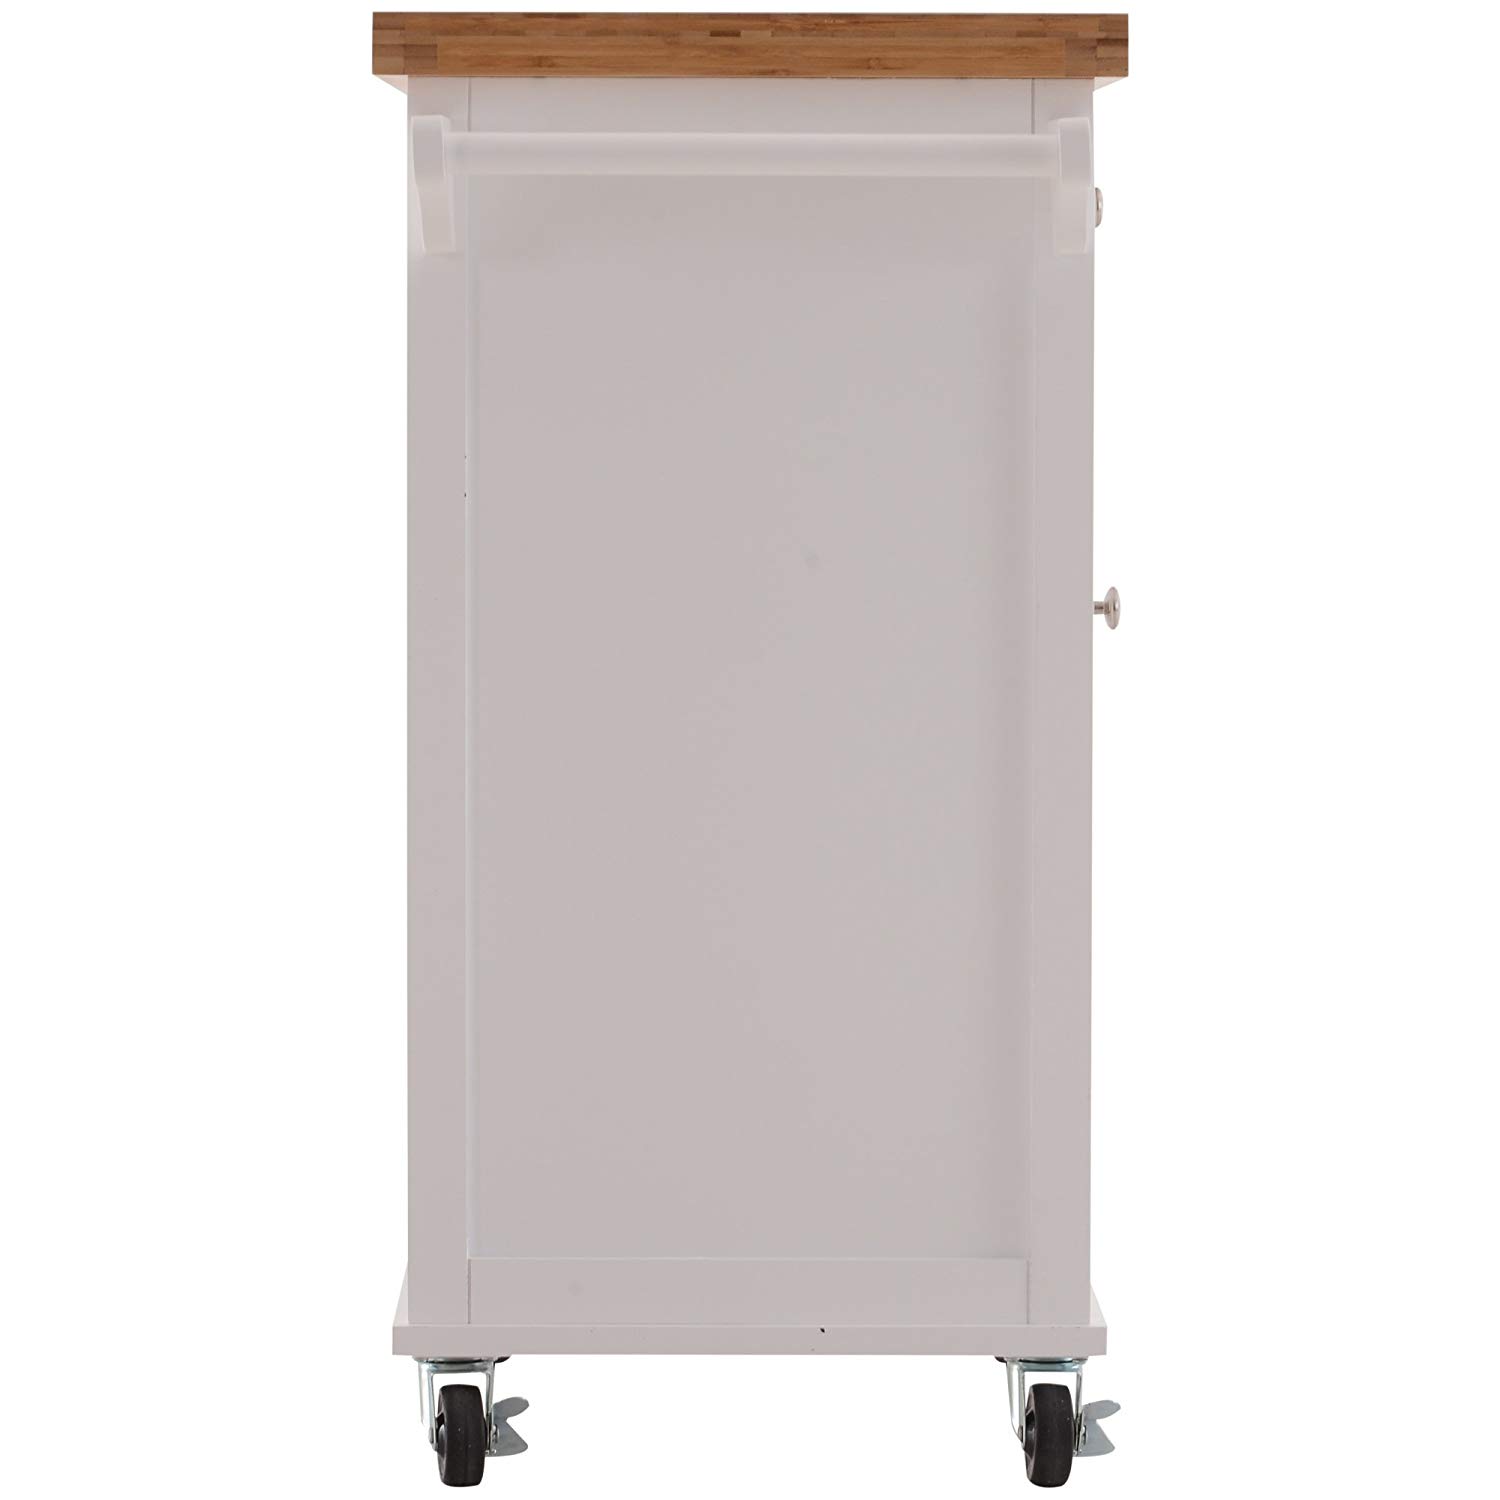 Guaranteed Quality Wood Rolling Kitchen Trolley Cart Cabinet